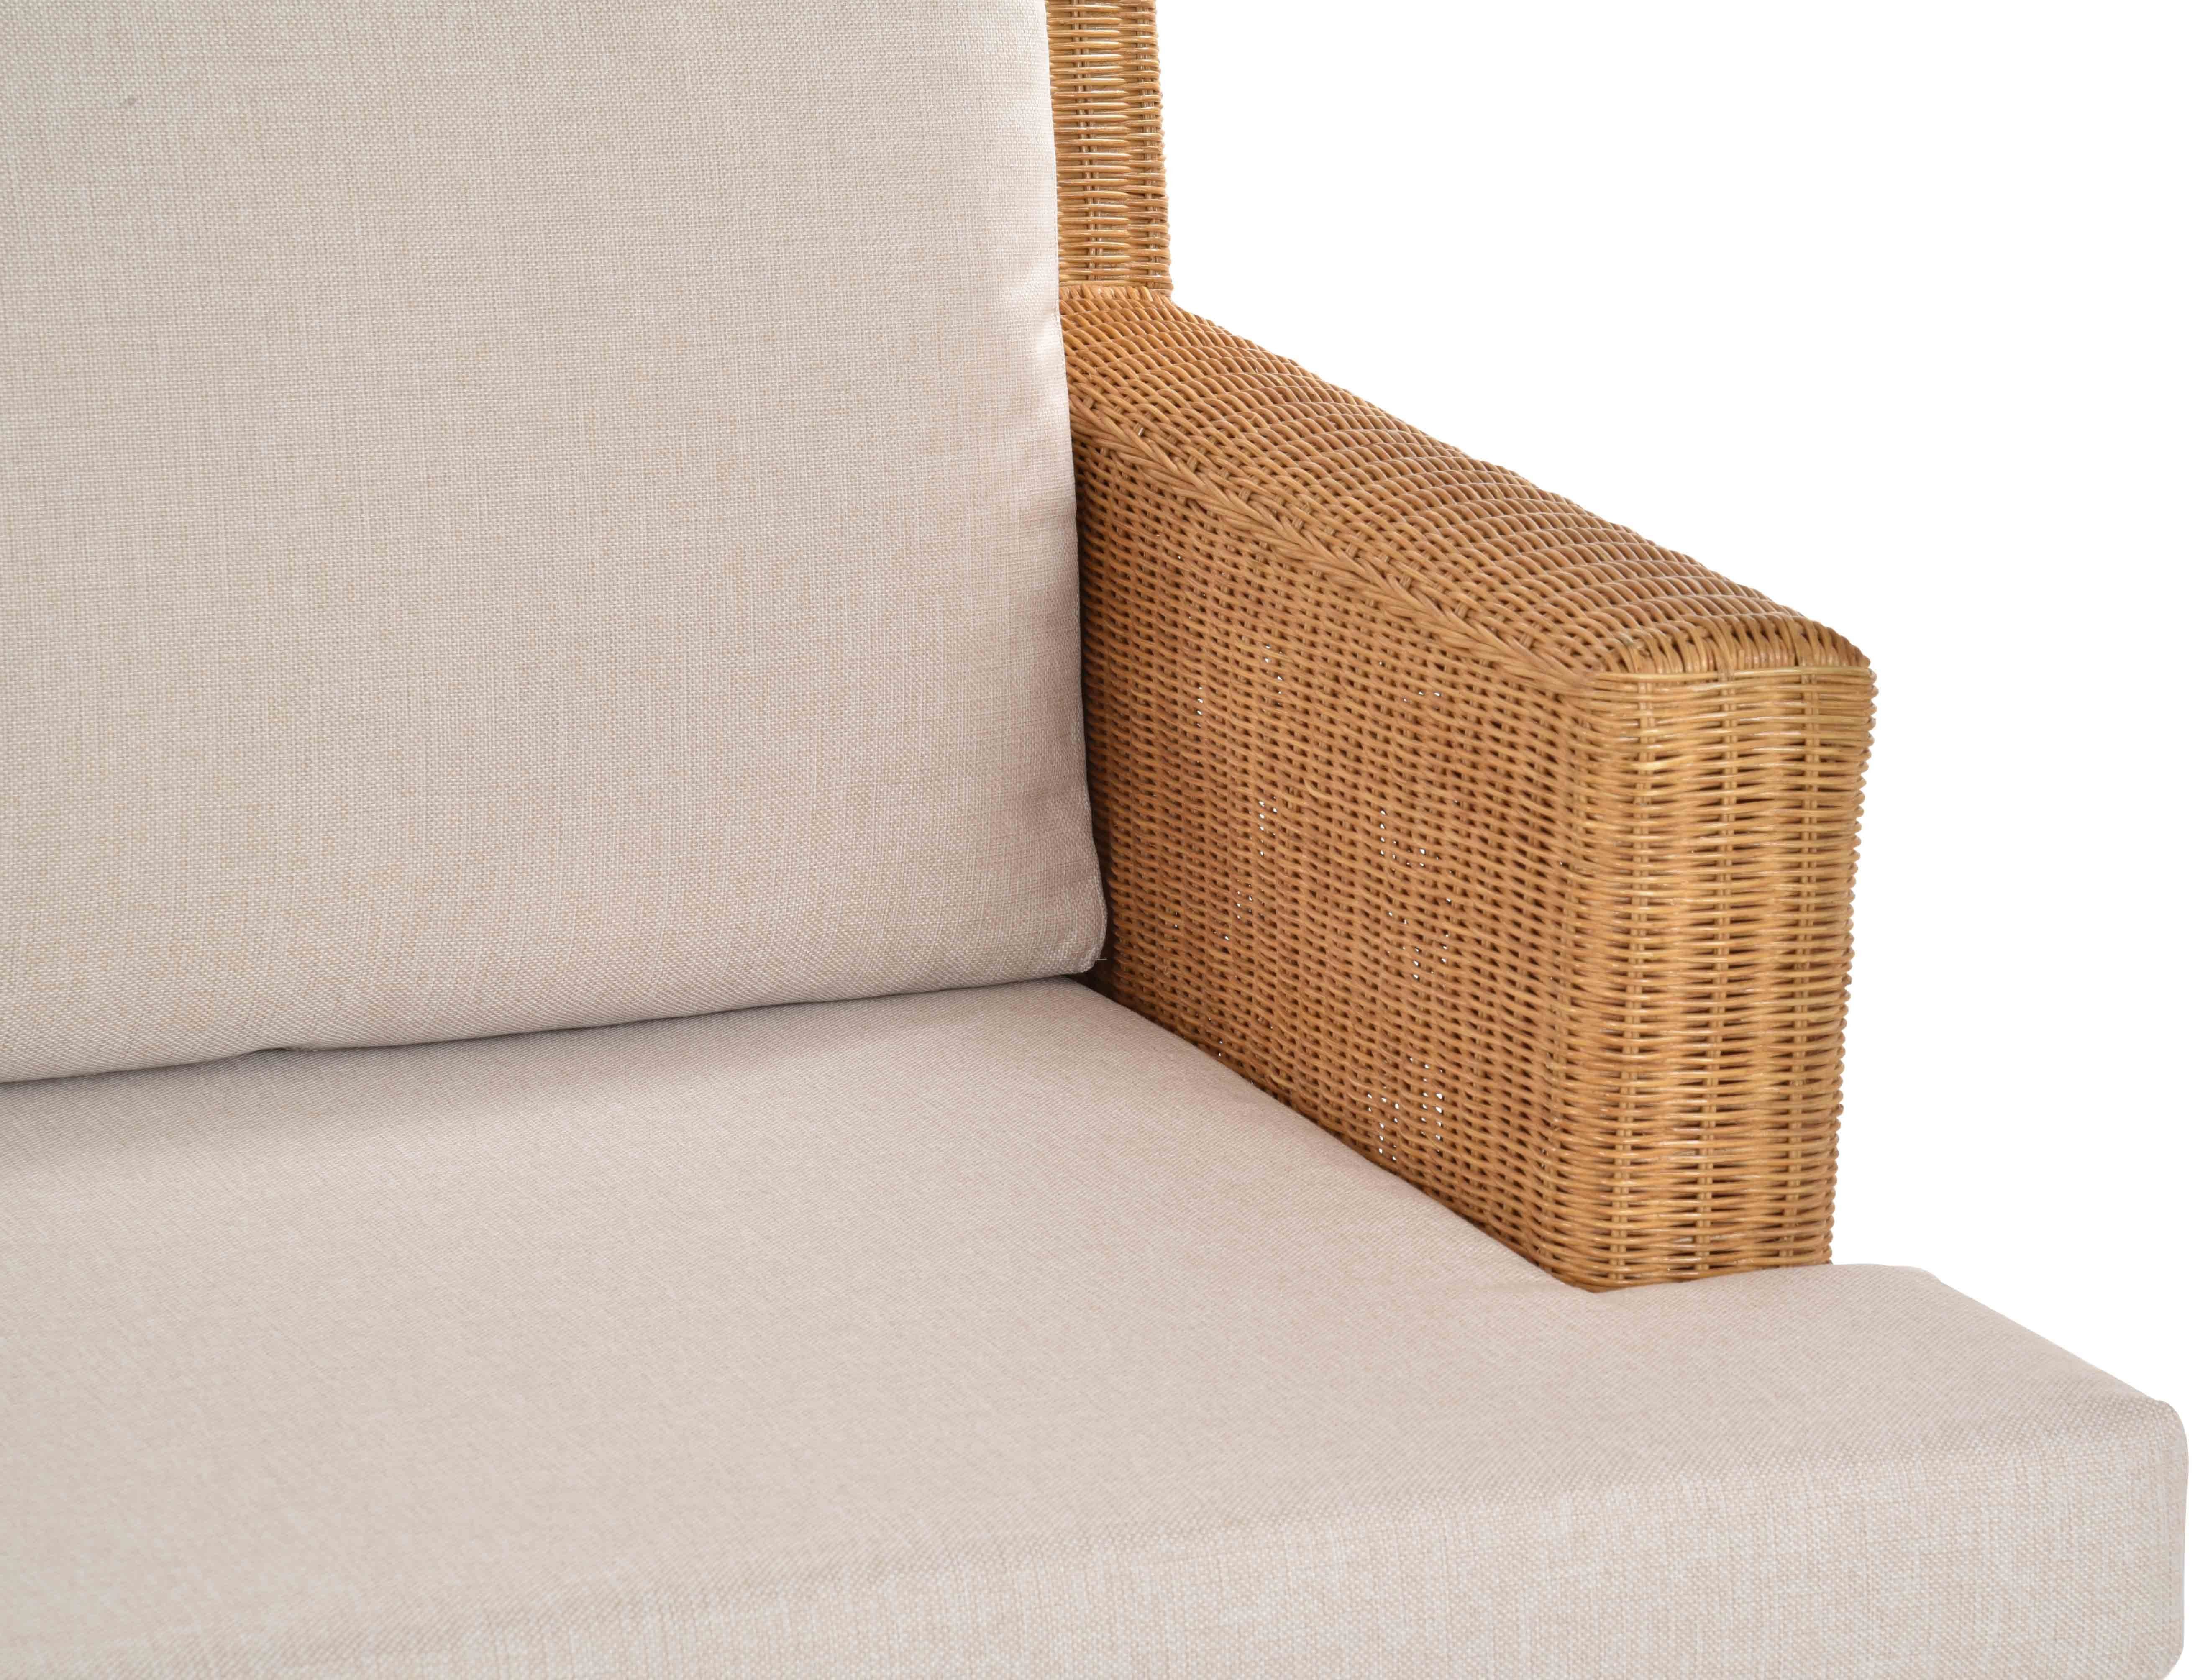 Wohnzimmersofa, Lounge Home Rattancouch 2-teilig gerade Krines Rattansofa Loungesofa Rattan Loungesofa